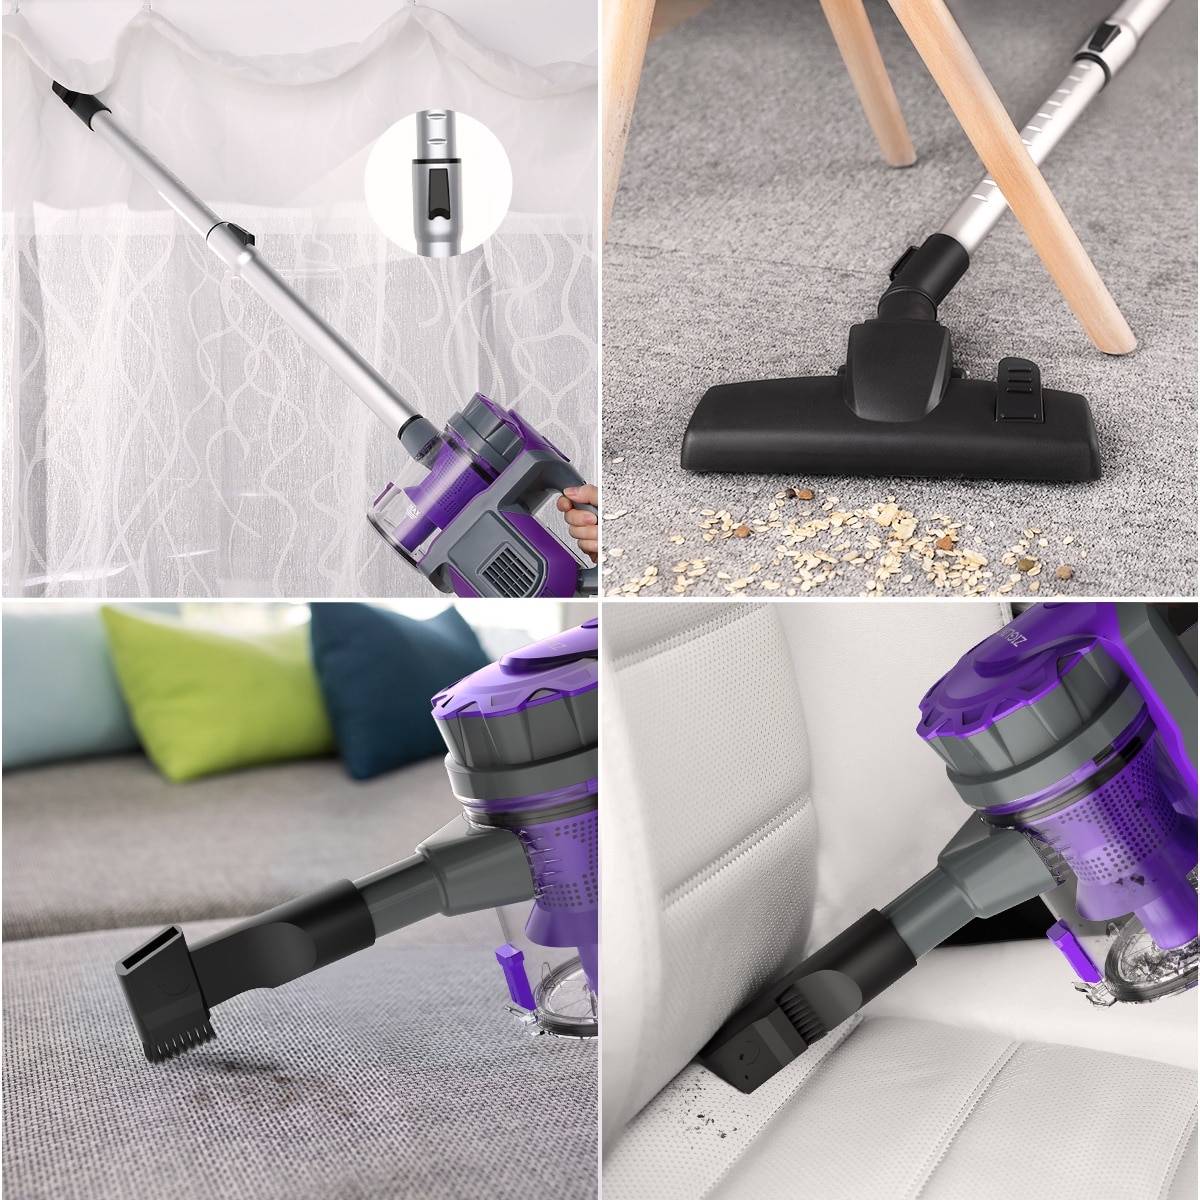 https://ak1.ostkcdn.com/images/products/is/images/direct/212064f2e29d194c13ccbbf00035fbe783be2082/ZIGLINT-Z3-Portable-Cordless-Rechargeable-Handheld-Vacuum-Cleaner-Dust-Cleaner-120W.jpg